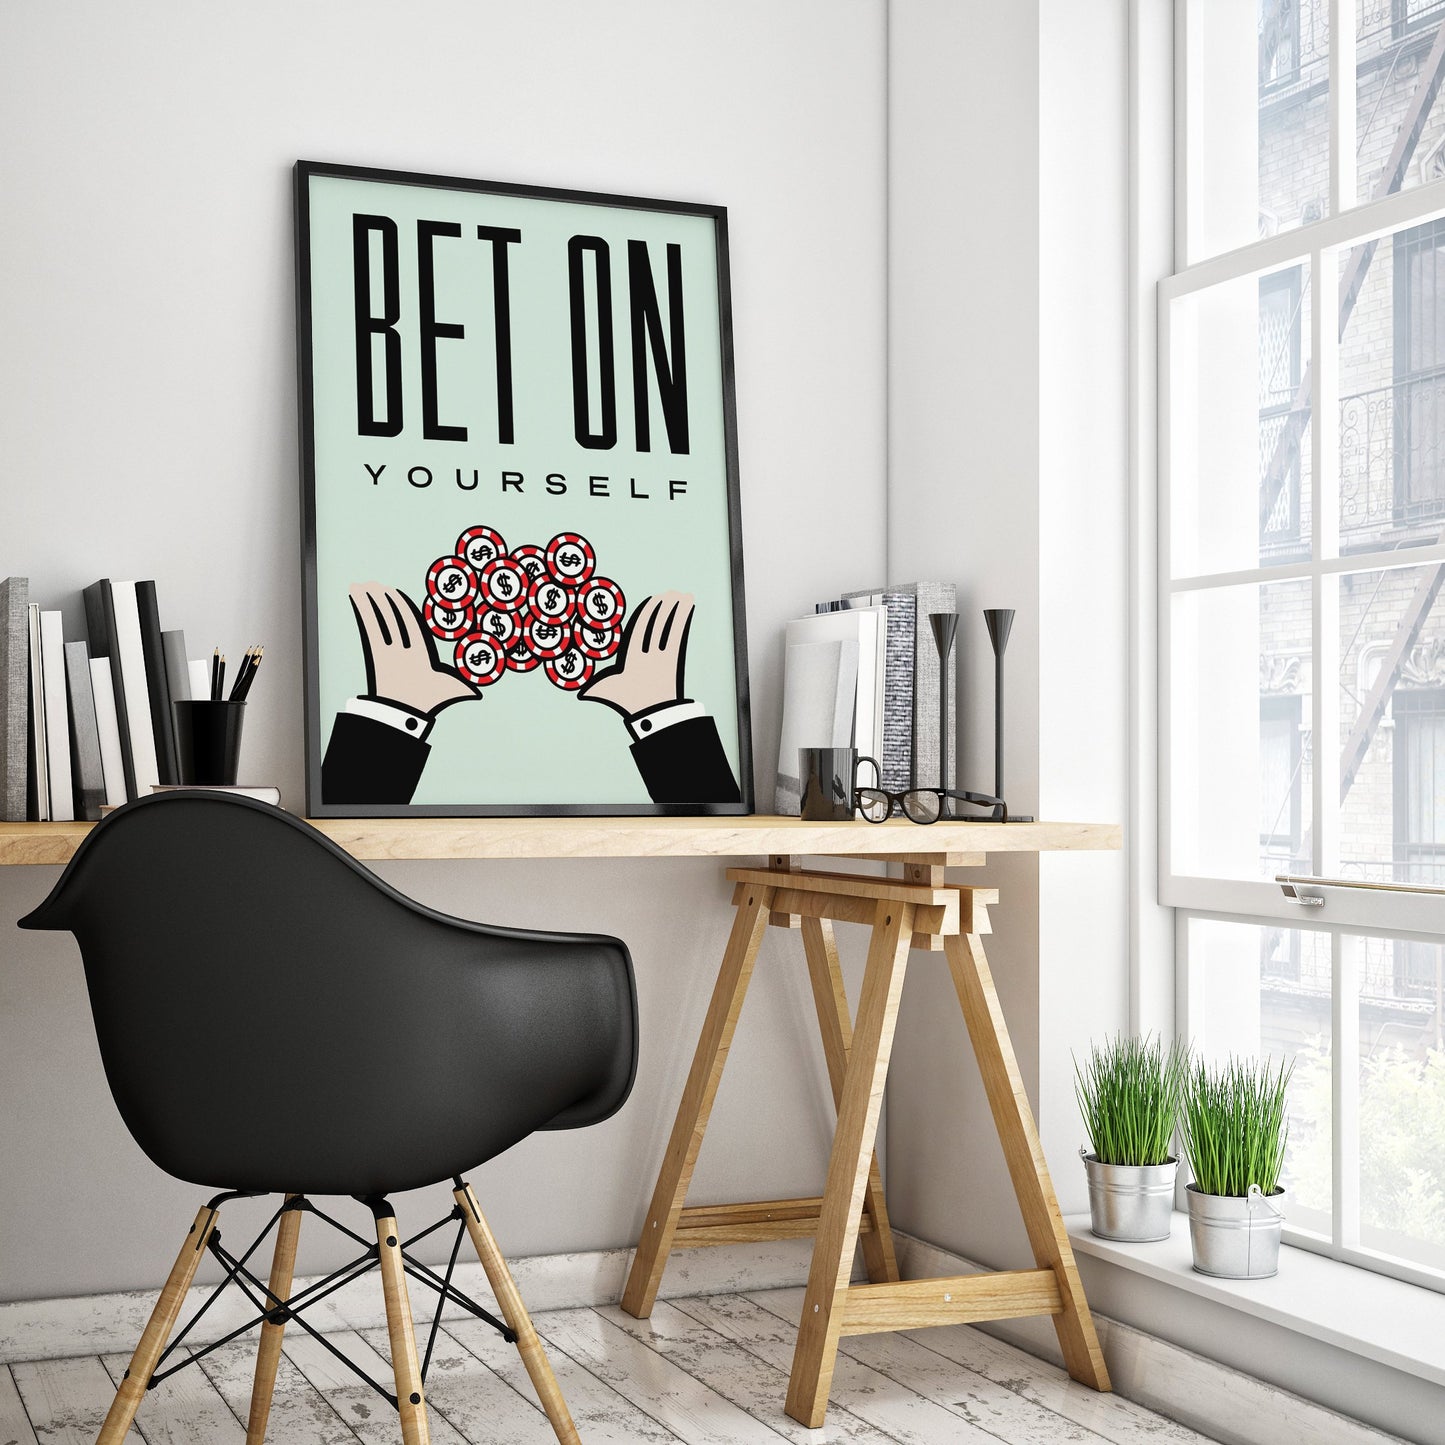 BET ON YOURSELF Wall Art Poster for Home Office